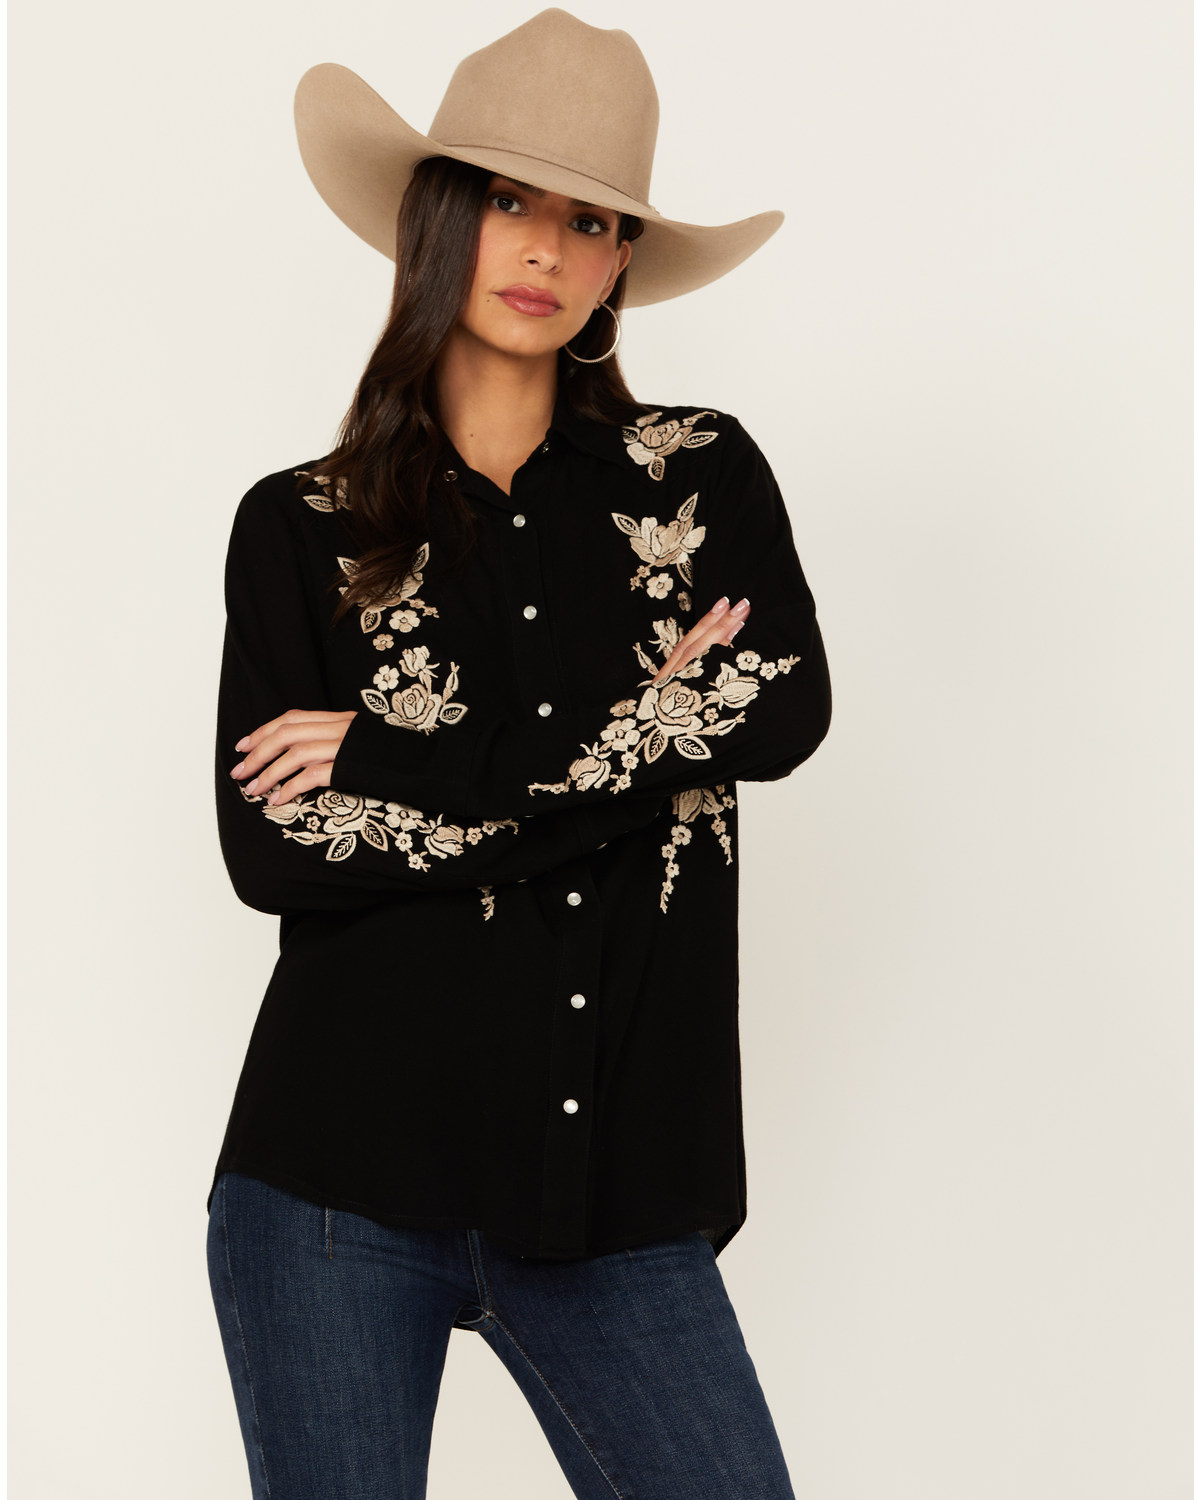 Stetson Women's Retro Floral Embroidered Long Sleeve Snap Western Shirt